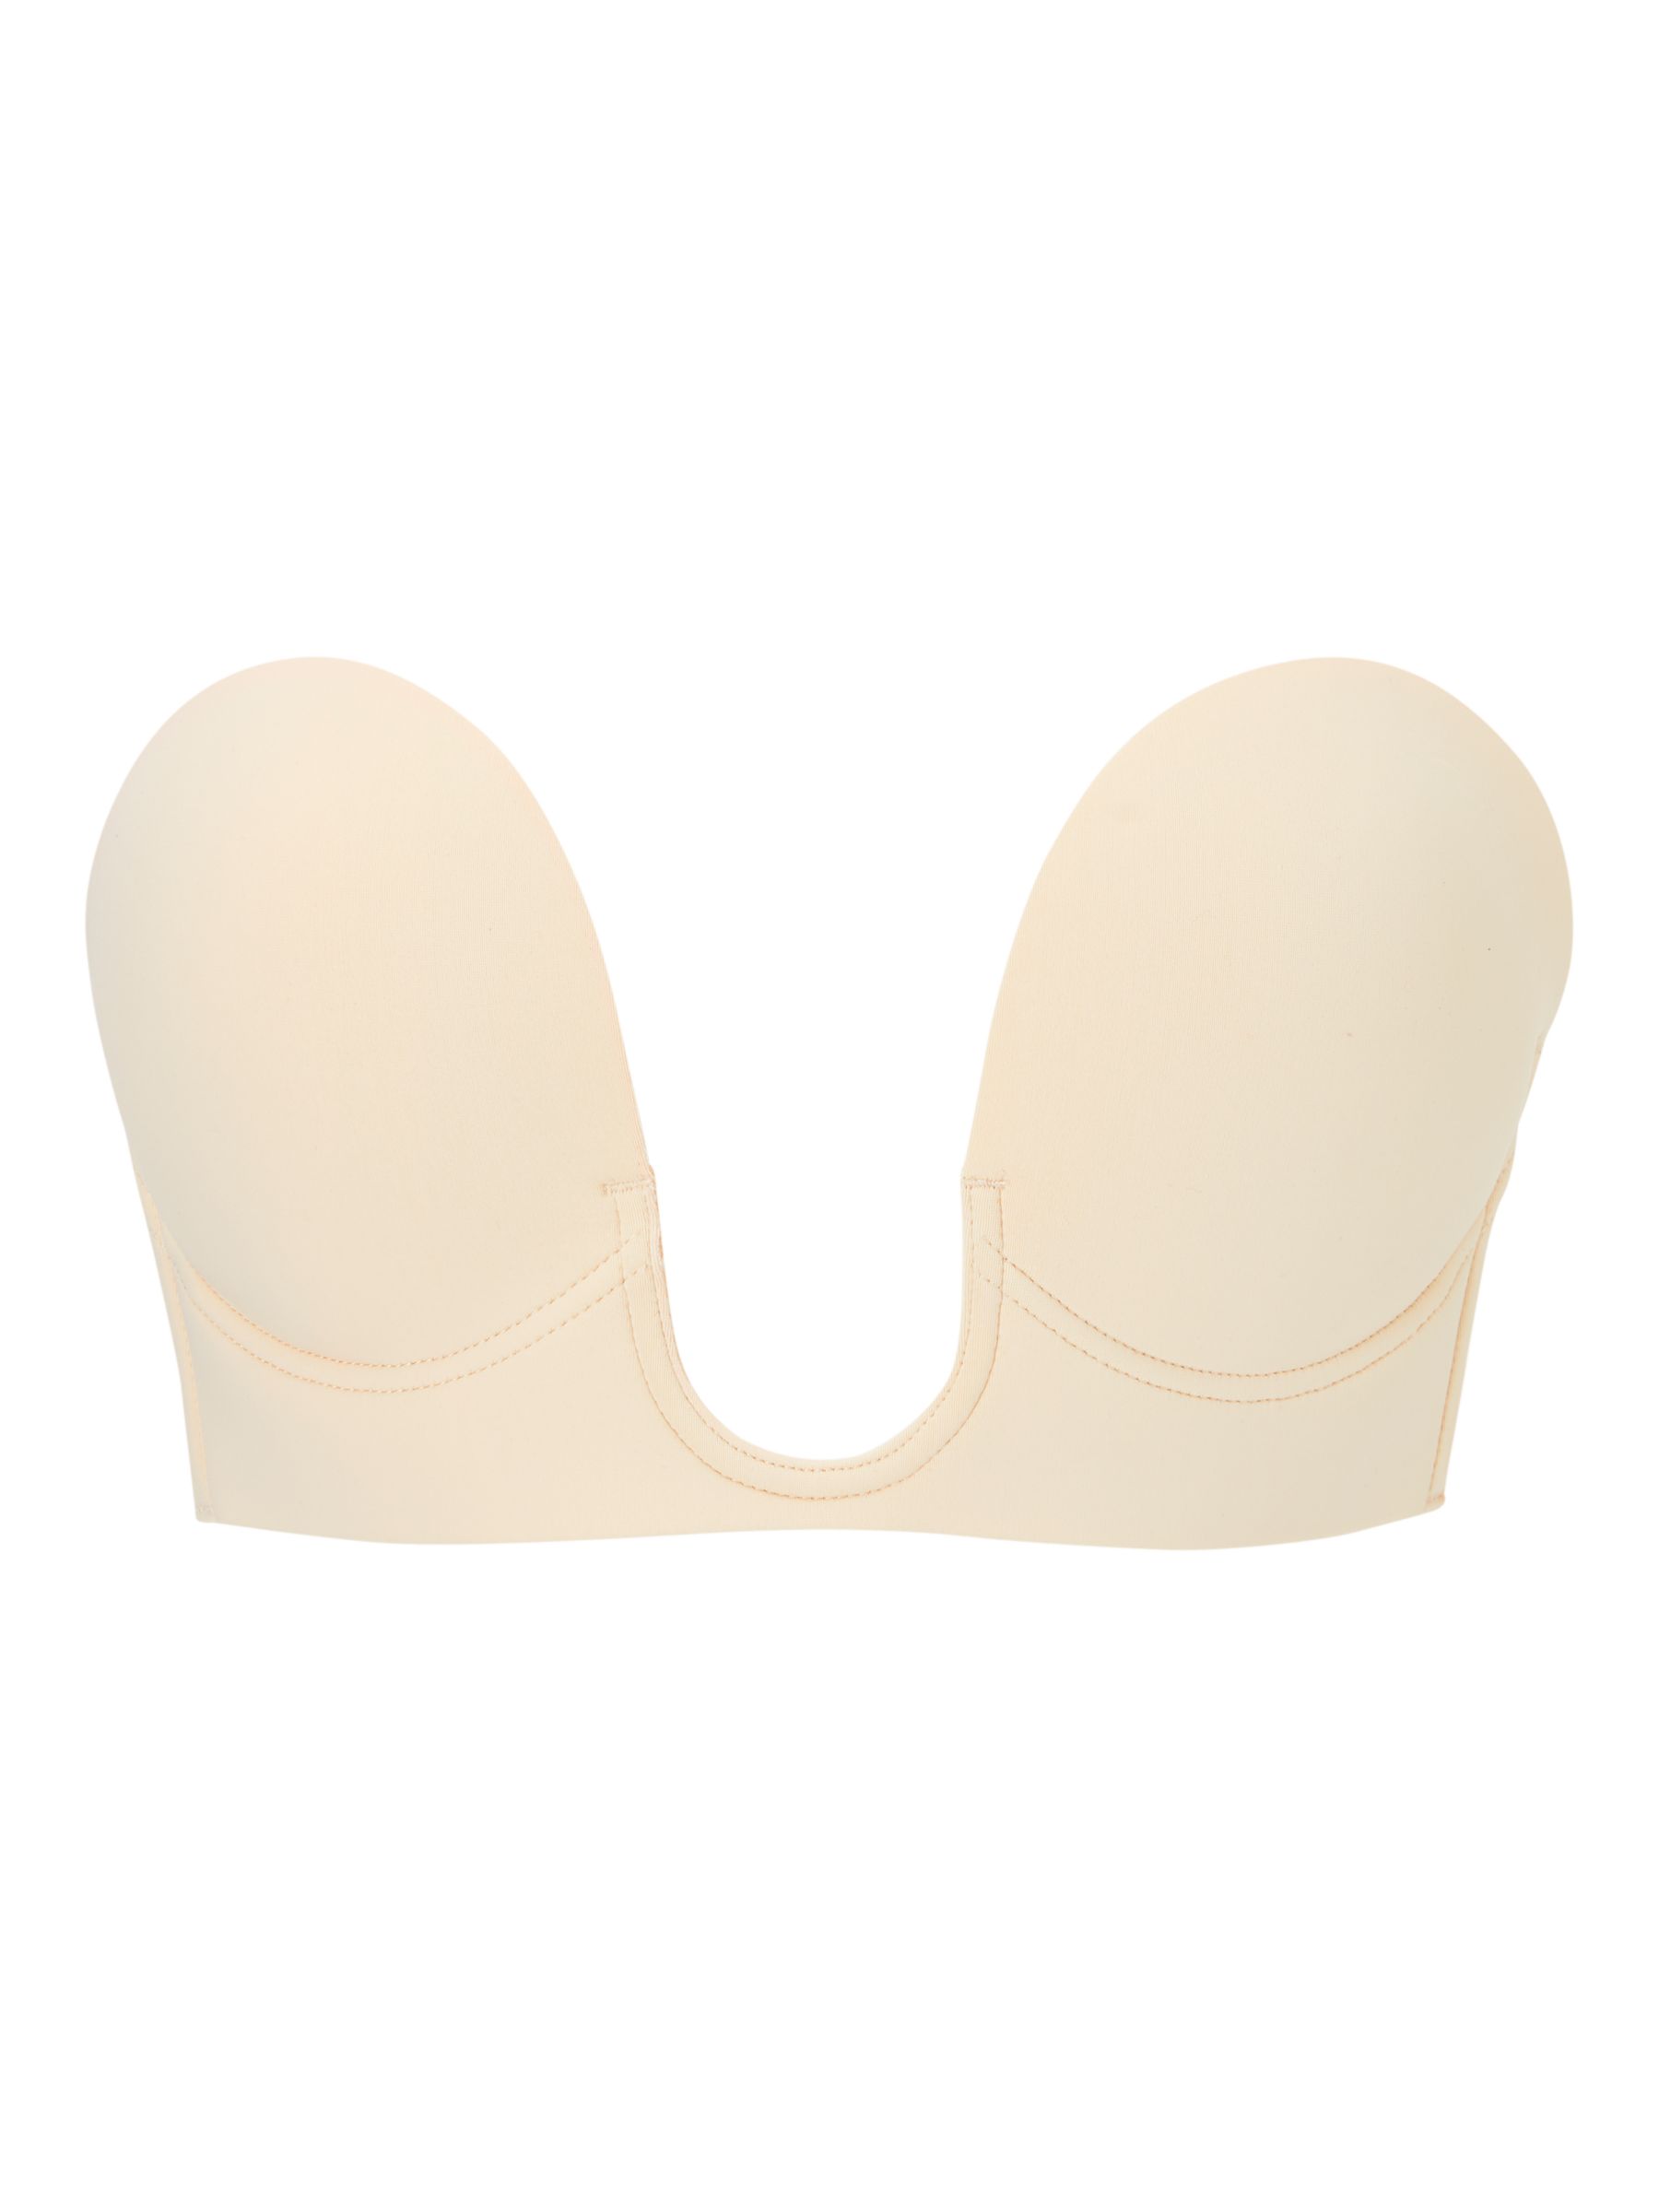 John Lewis Albany Lace Cradle Multiway Strapless Bra, Almond at